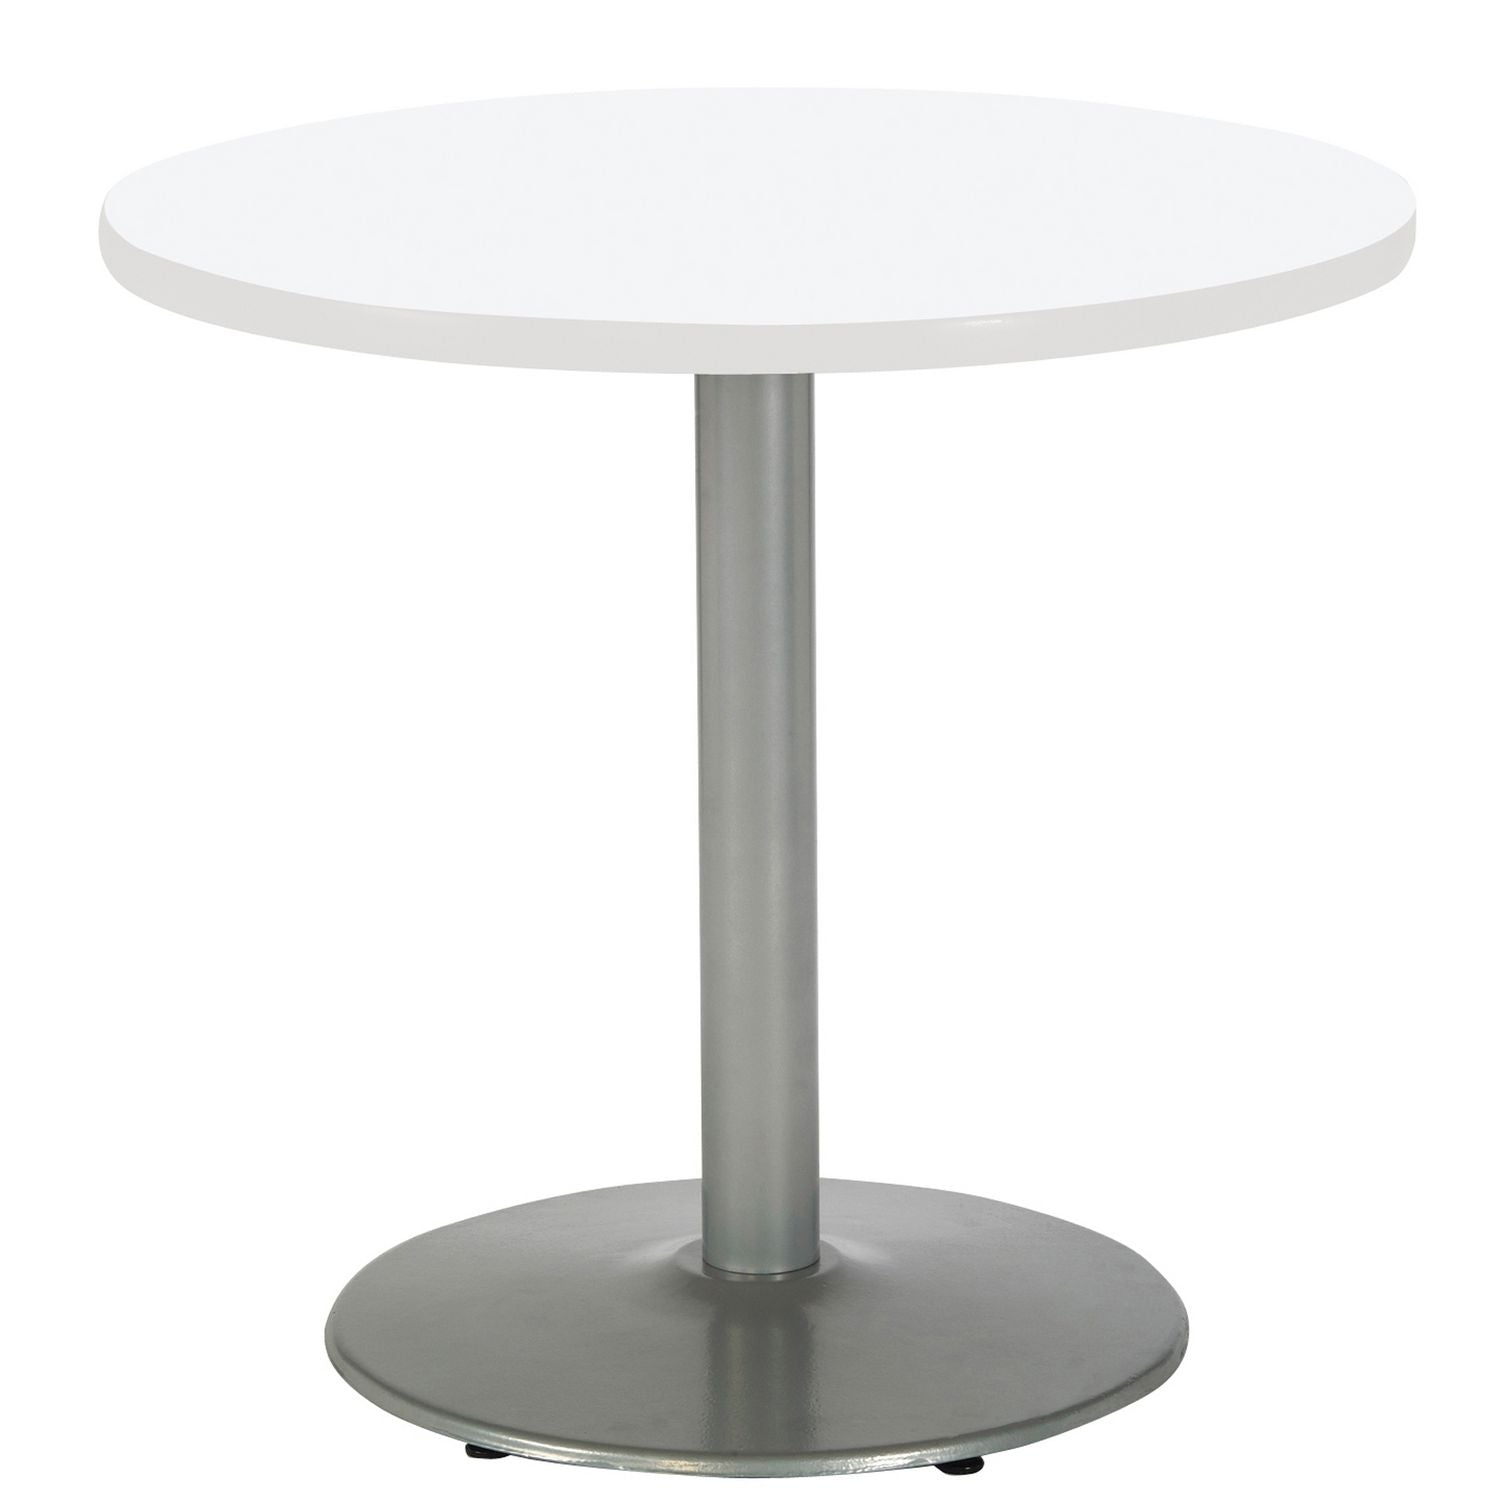 pedestal-table-with-four-brownstone-kool-series-chairs-round-36-dia-x-29h-designer-white-ships-in-4-6-business-days_kfi811774036733 - 2